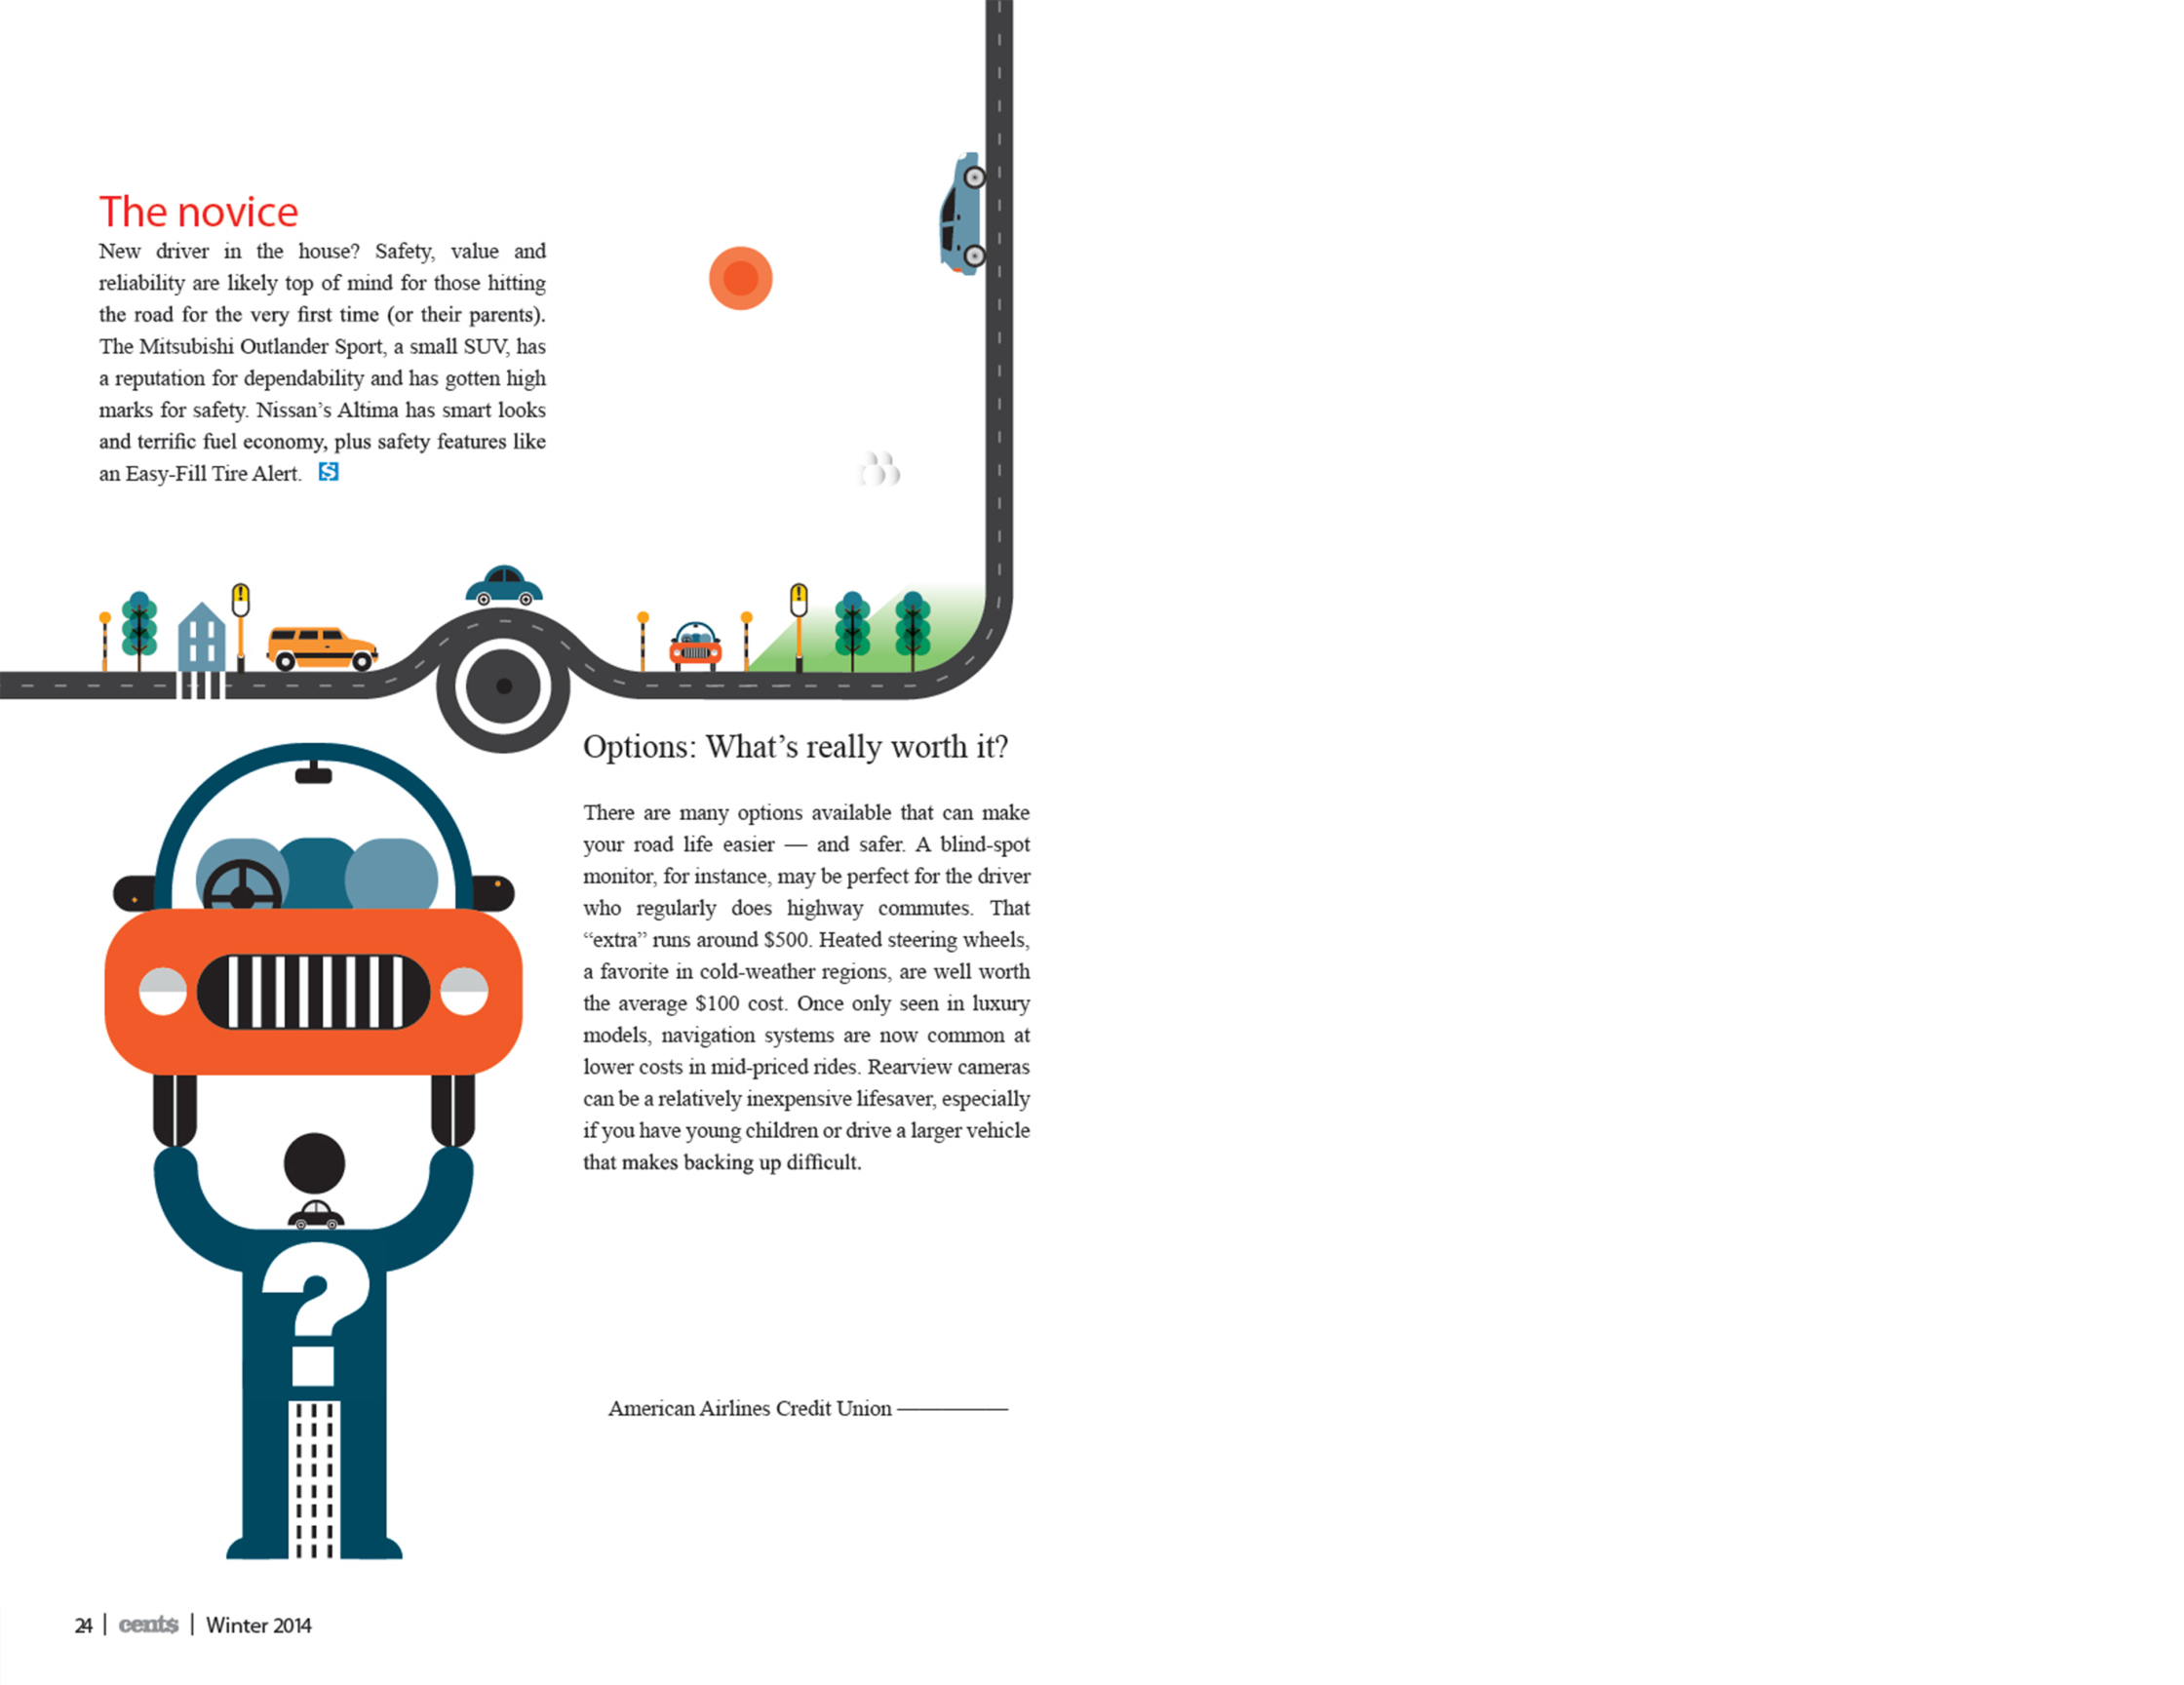 Car Feature 2 / American Airlines Credit Union Magazine